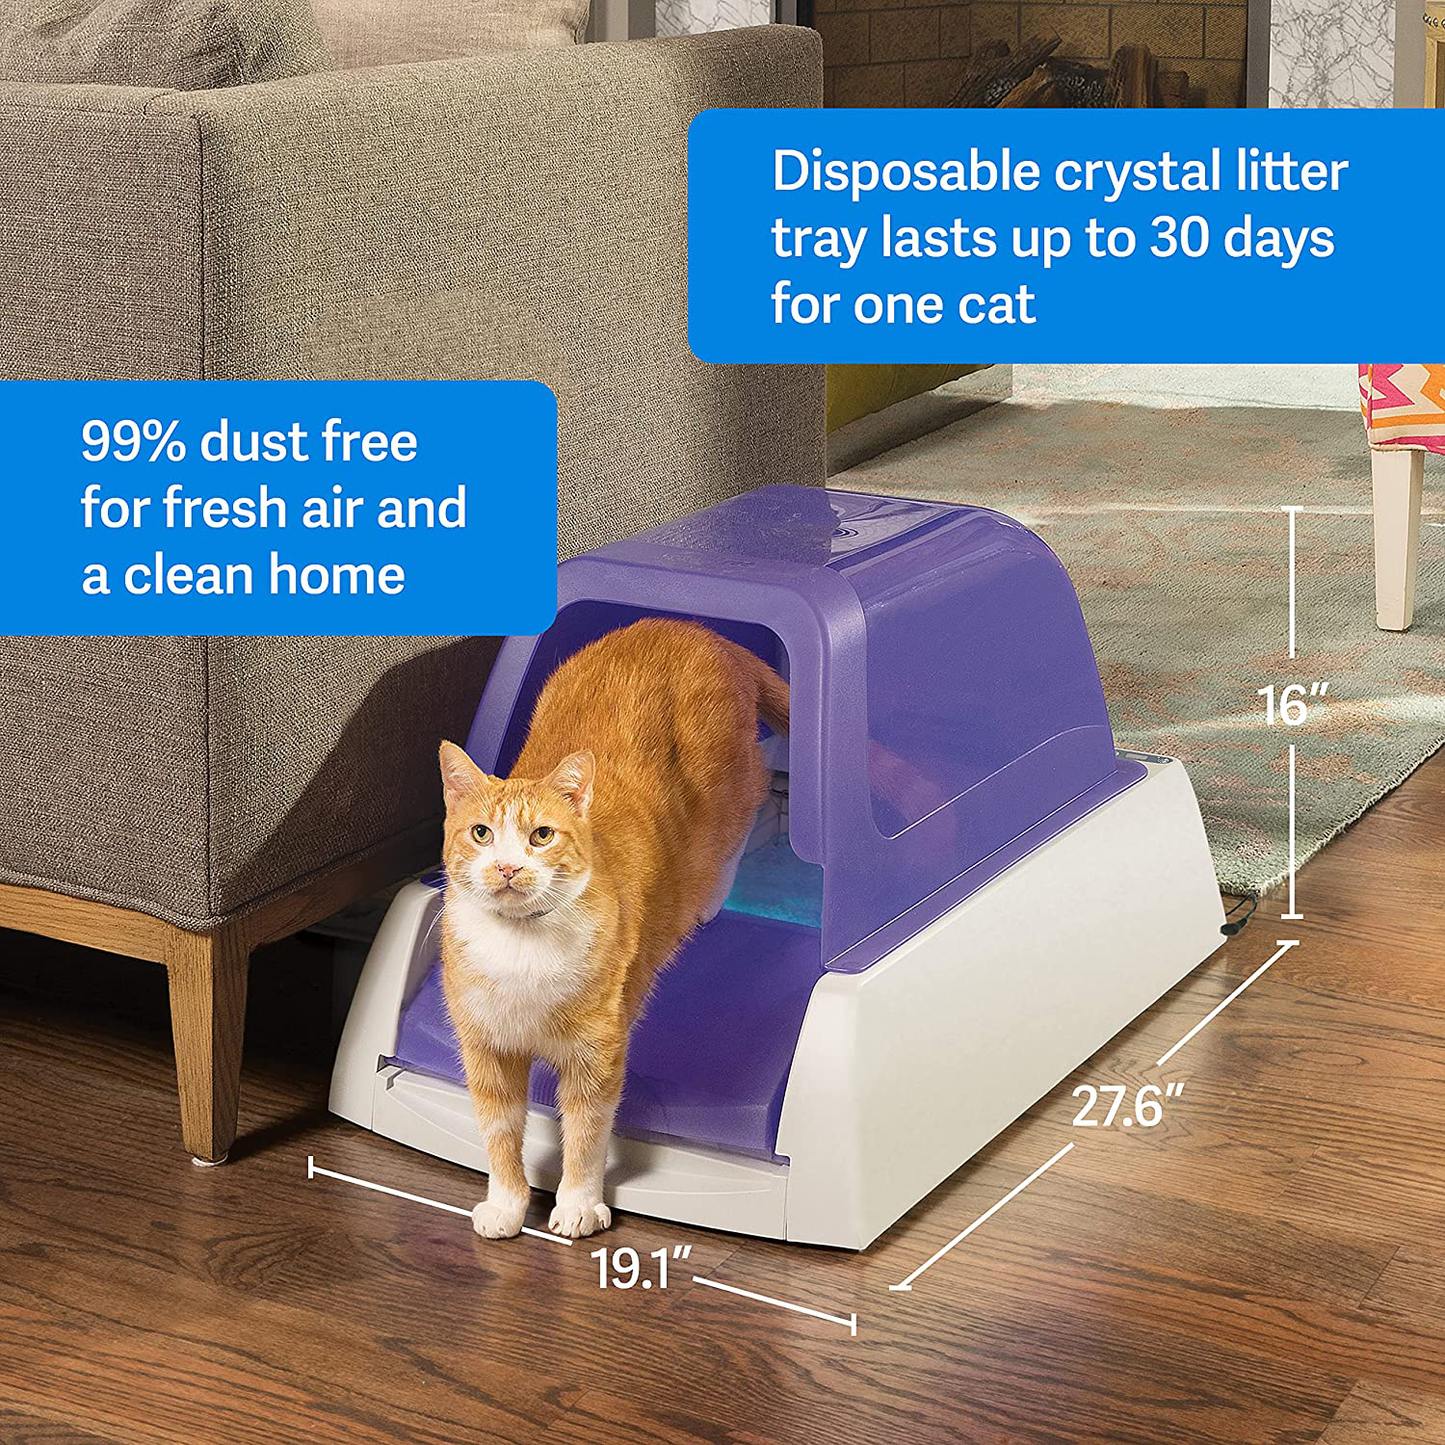 Petsafe Scoopfree Original Automatic Self-Cleaning Cat Litter Boxes - Purple or Taupe - Ultra with Health Counter - Includes Disposable Litter Tray with 4.5 Lb Premium Blue Crystal Cat Litter